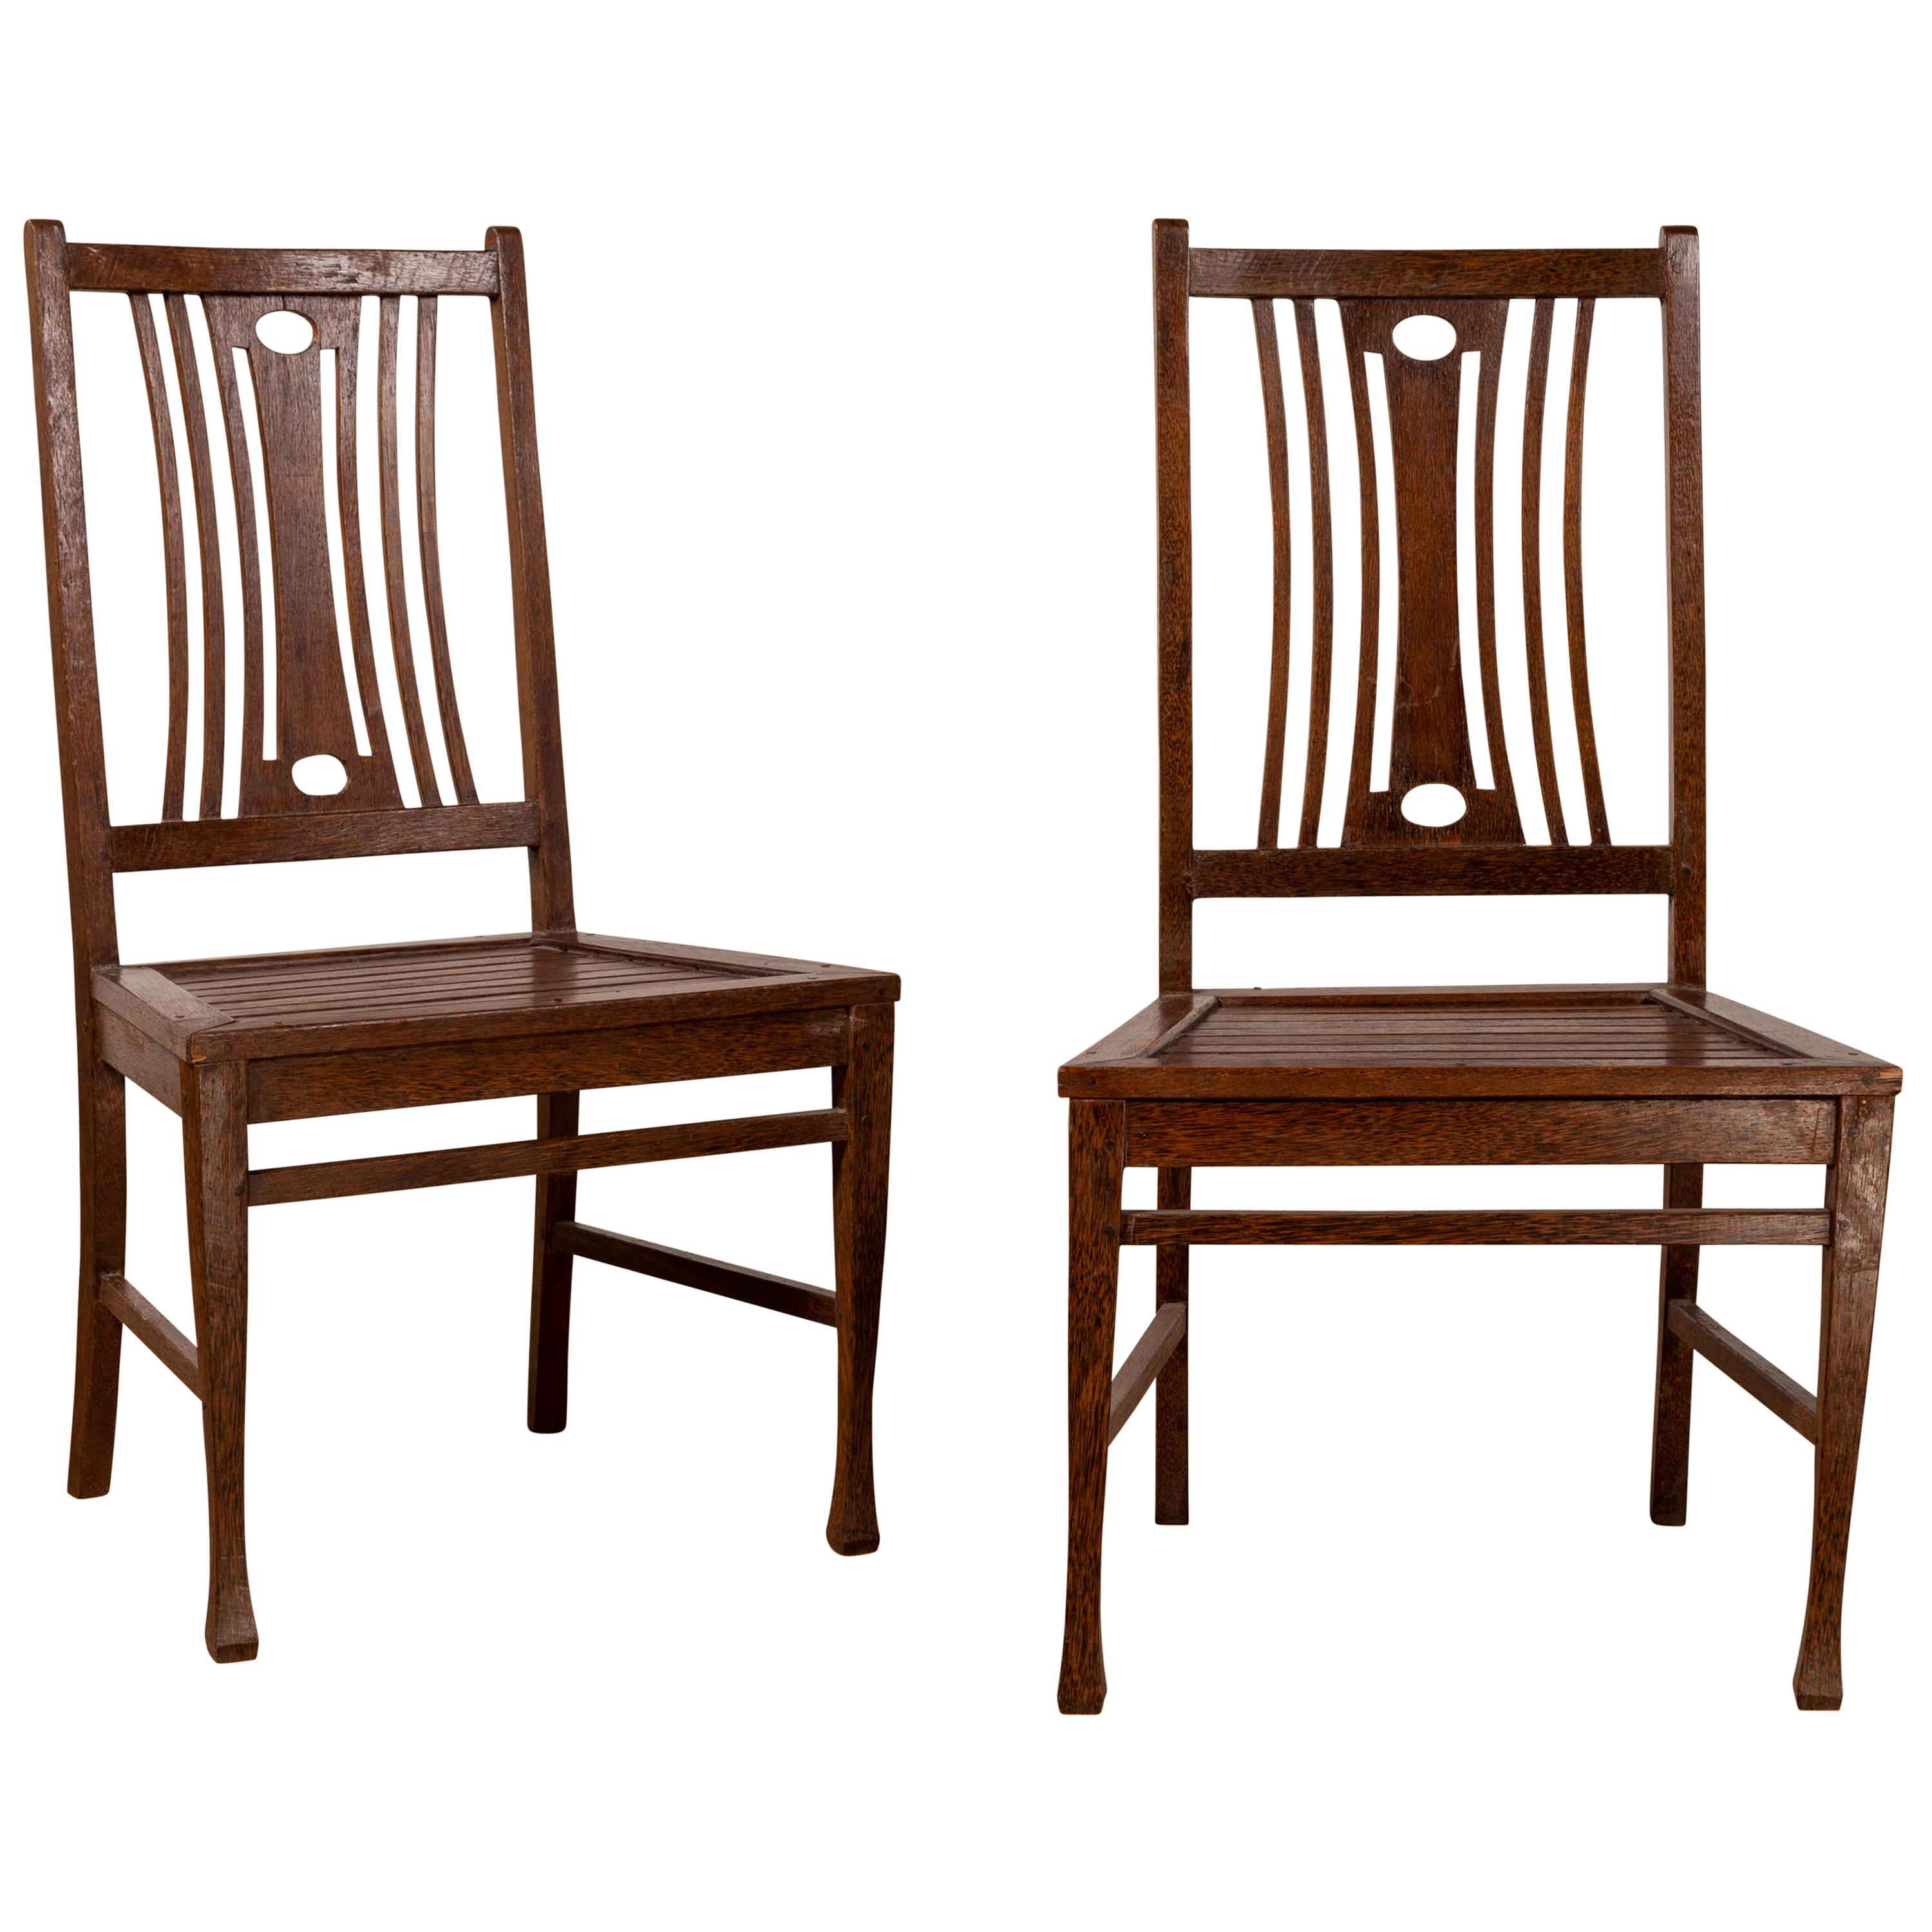 Pair of Midcentury Wooden Vintage Indonesian Side Chairs with Pierced Splats For Sale